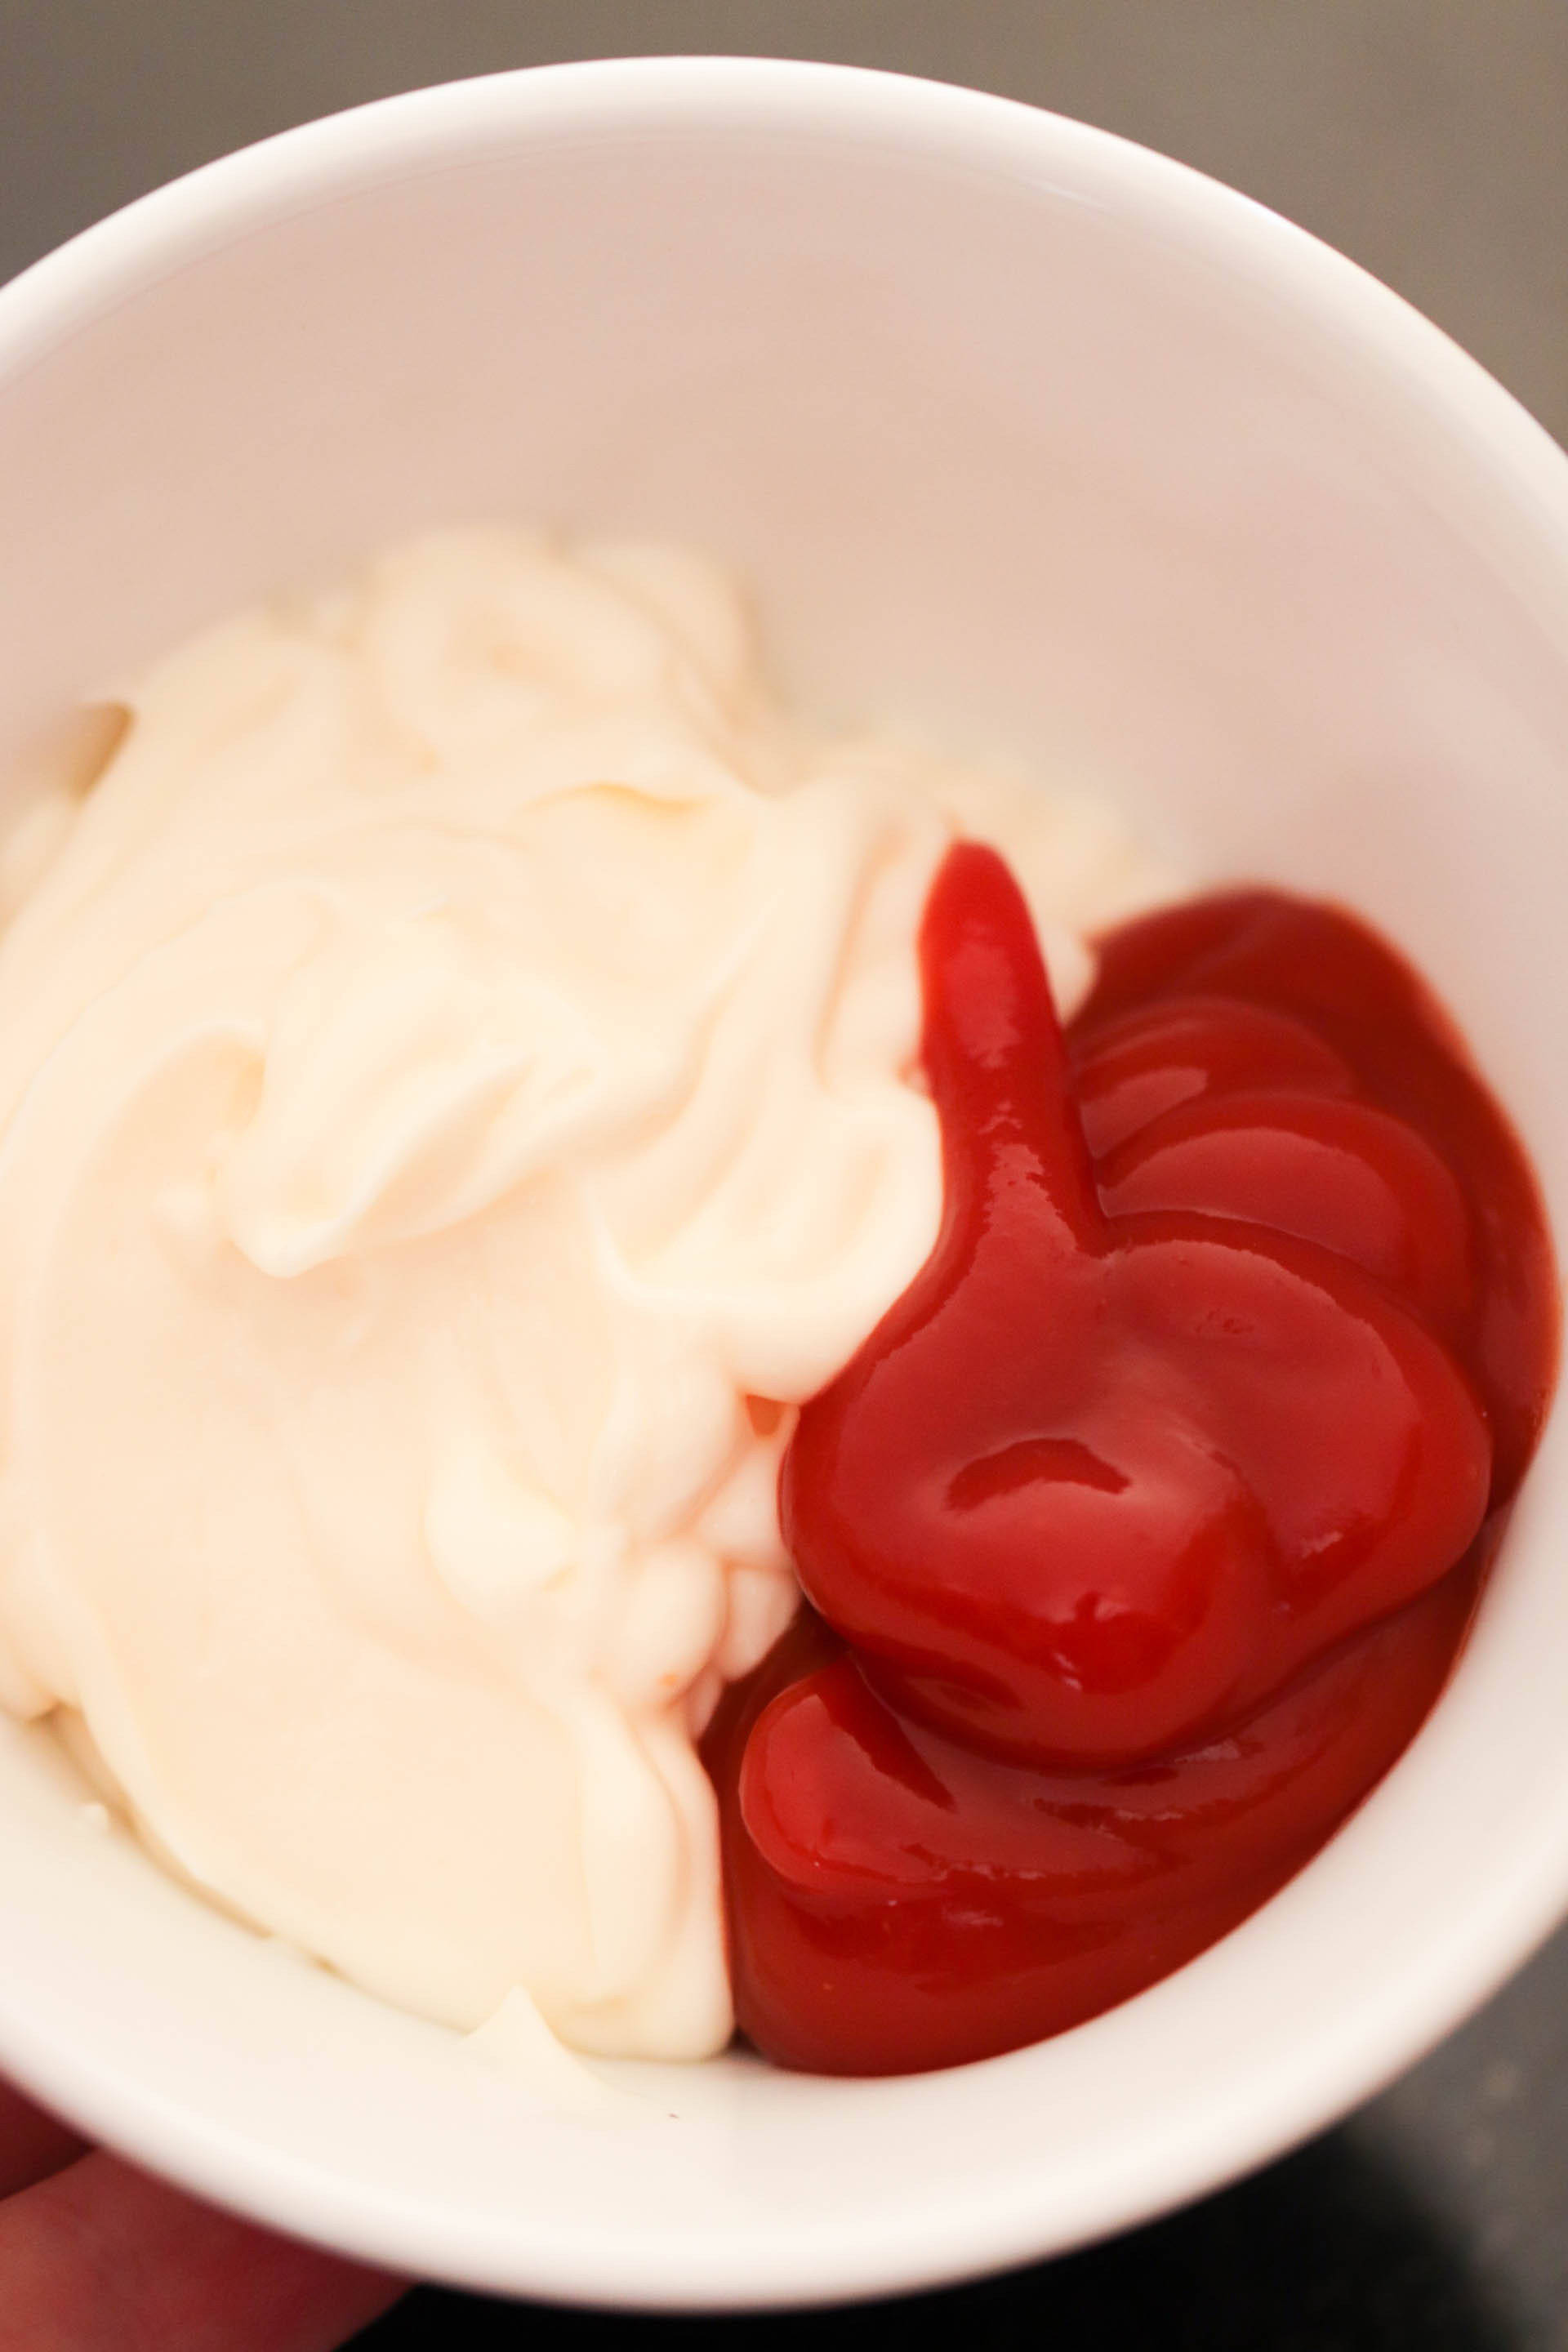 Ketchup and Mayo together in a small bowl